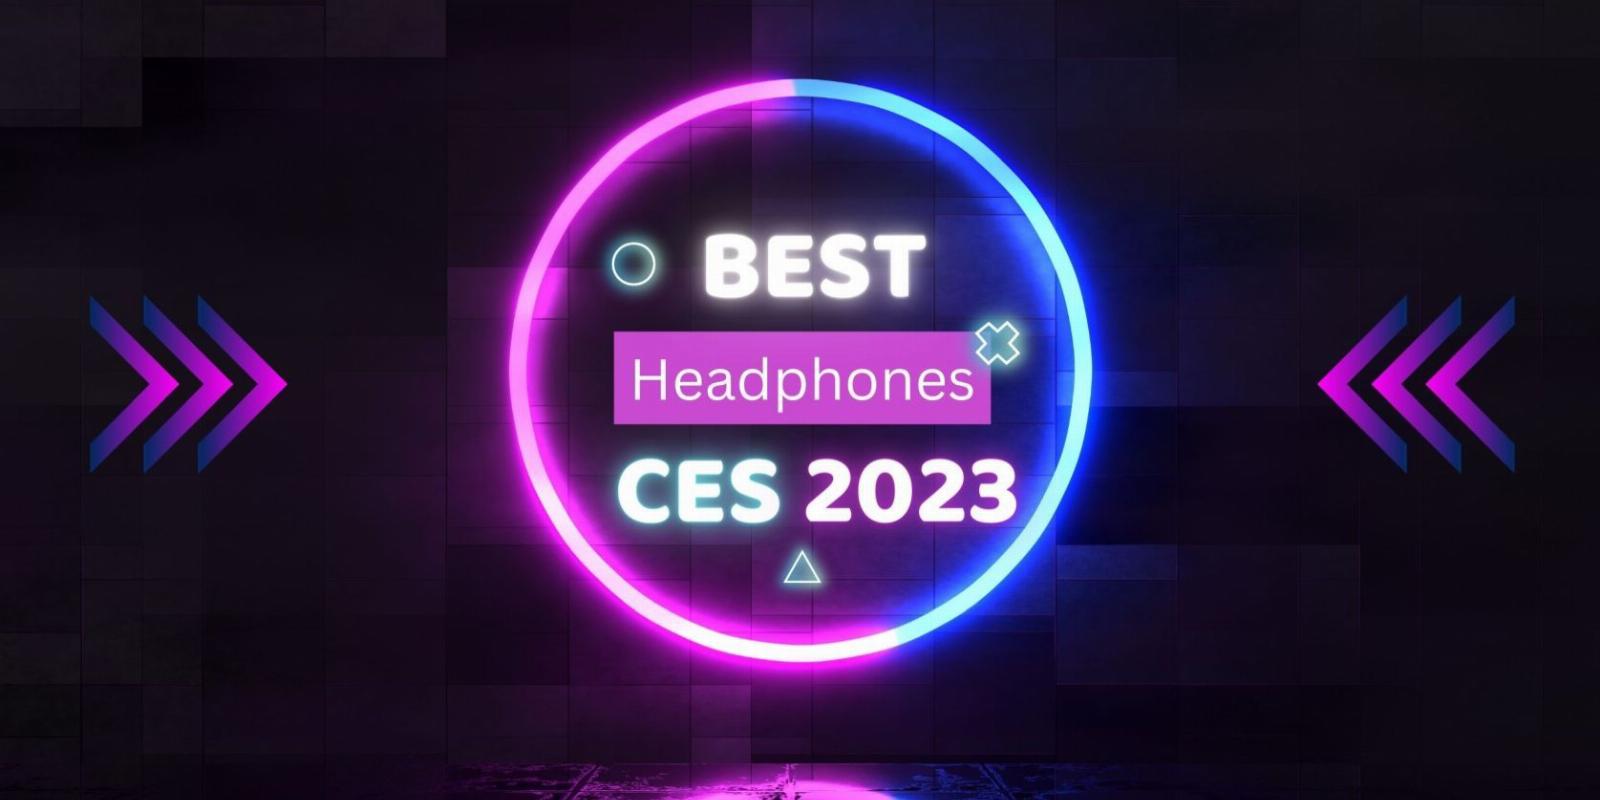 The Best Headphones Unveiled at CES 2023